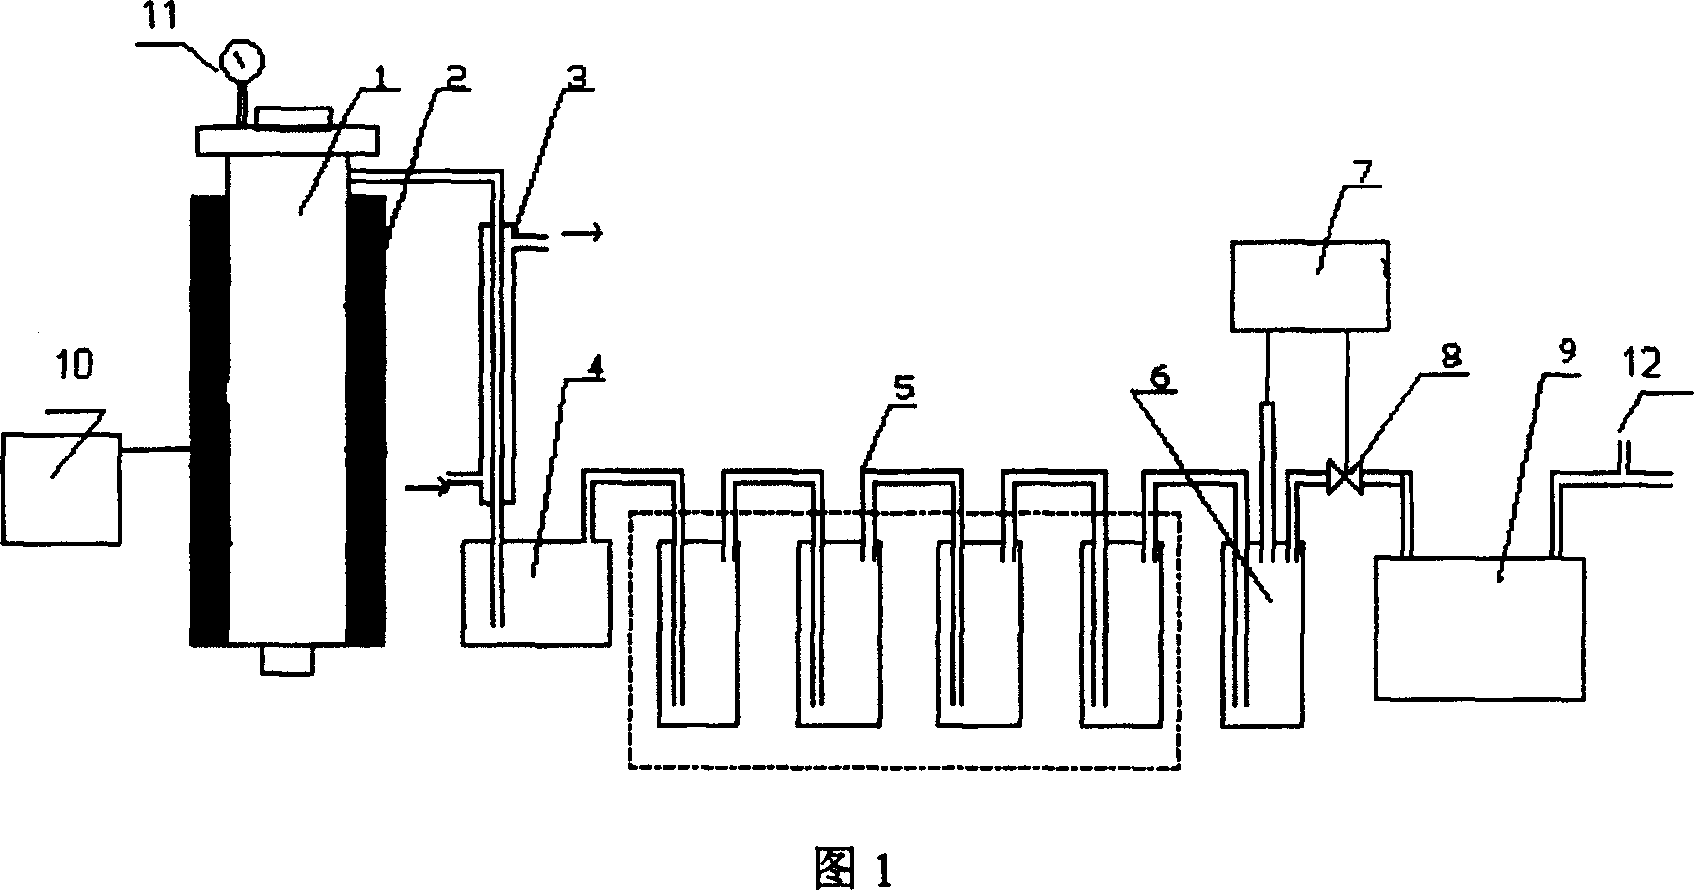 Method and equipment of vacuum catalytic cracking for preparing limonene, fuel oil and carbon black from scrap tire